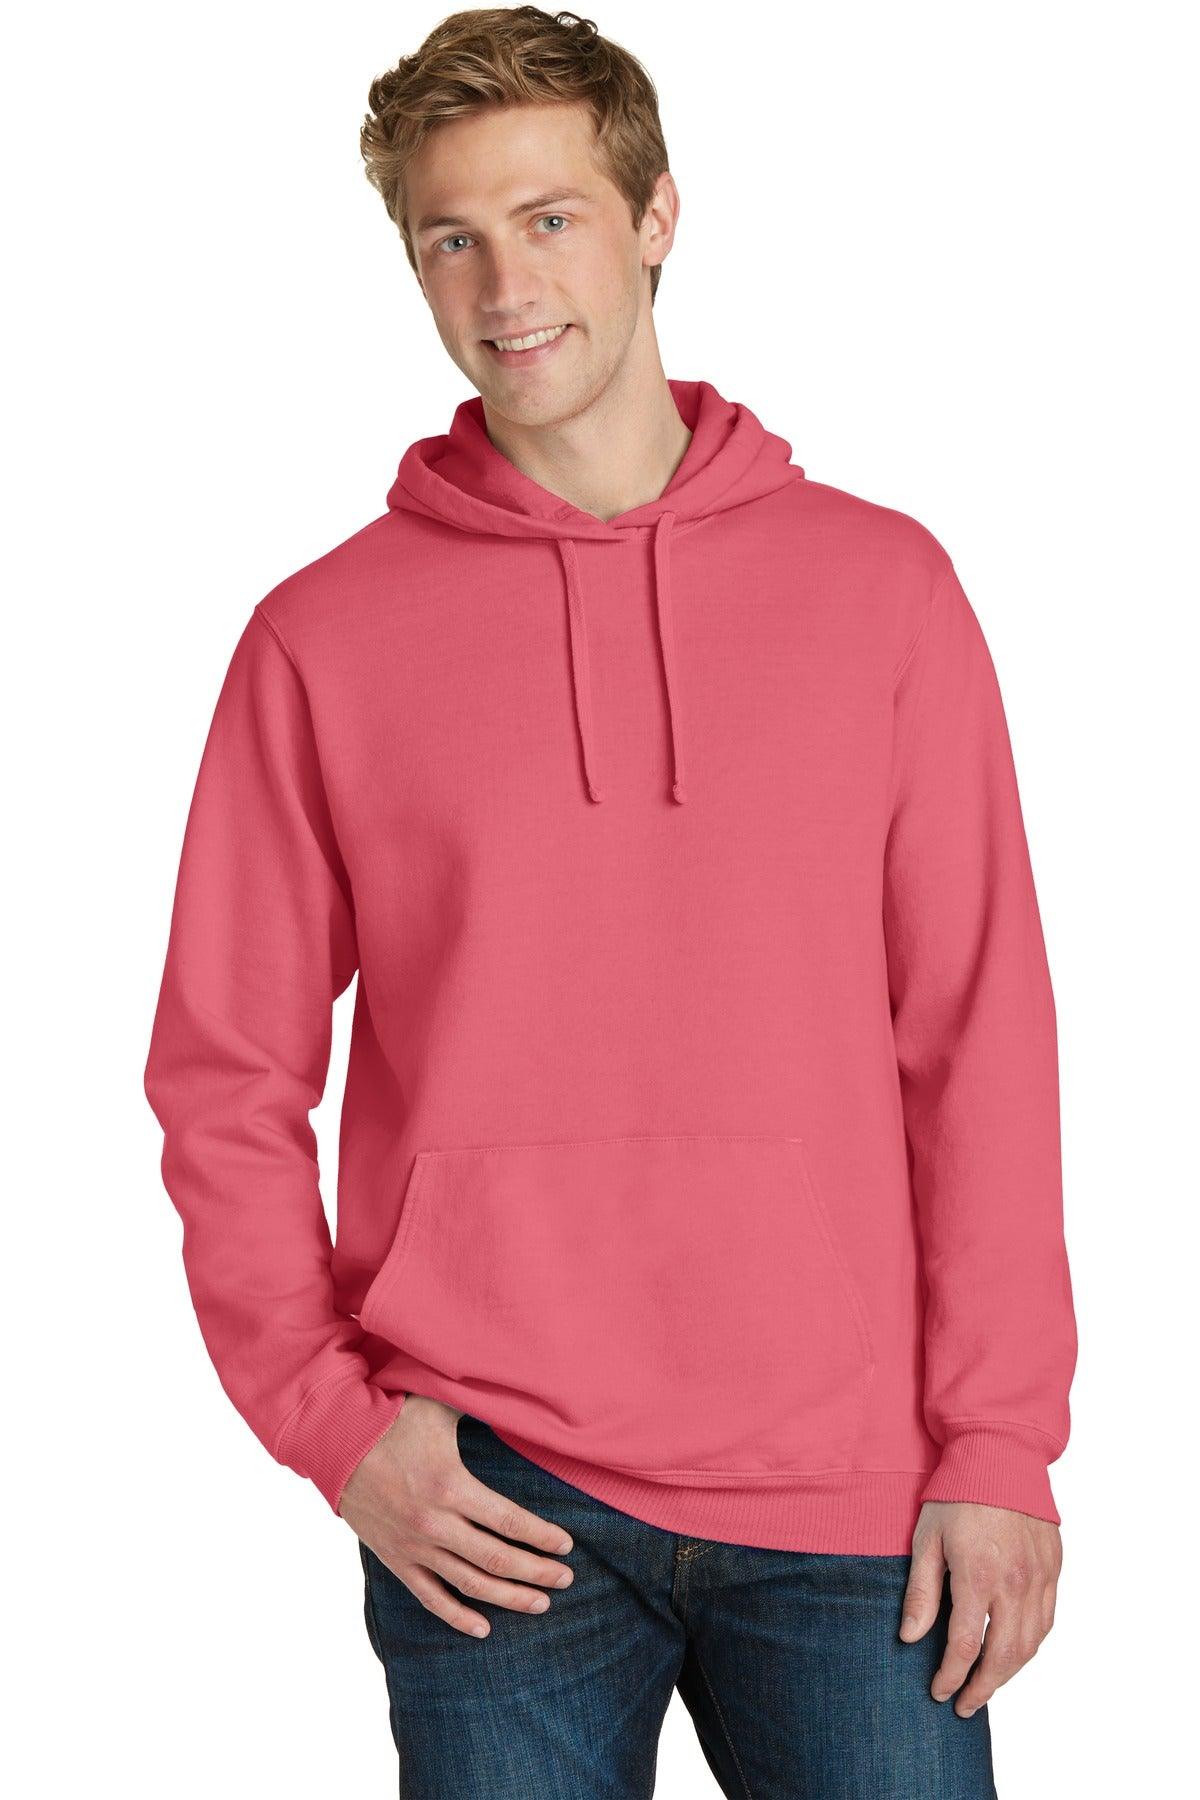 Port & Company Beach Wash Garment-Dyed Pullover Hooded Sweatshirt. PC098H - Dresses Max